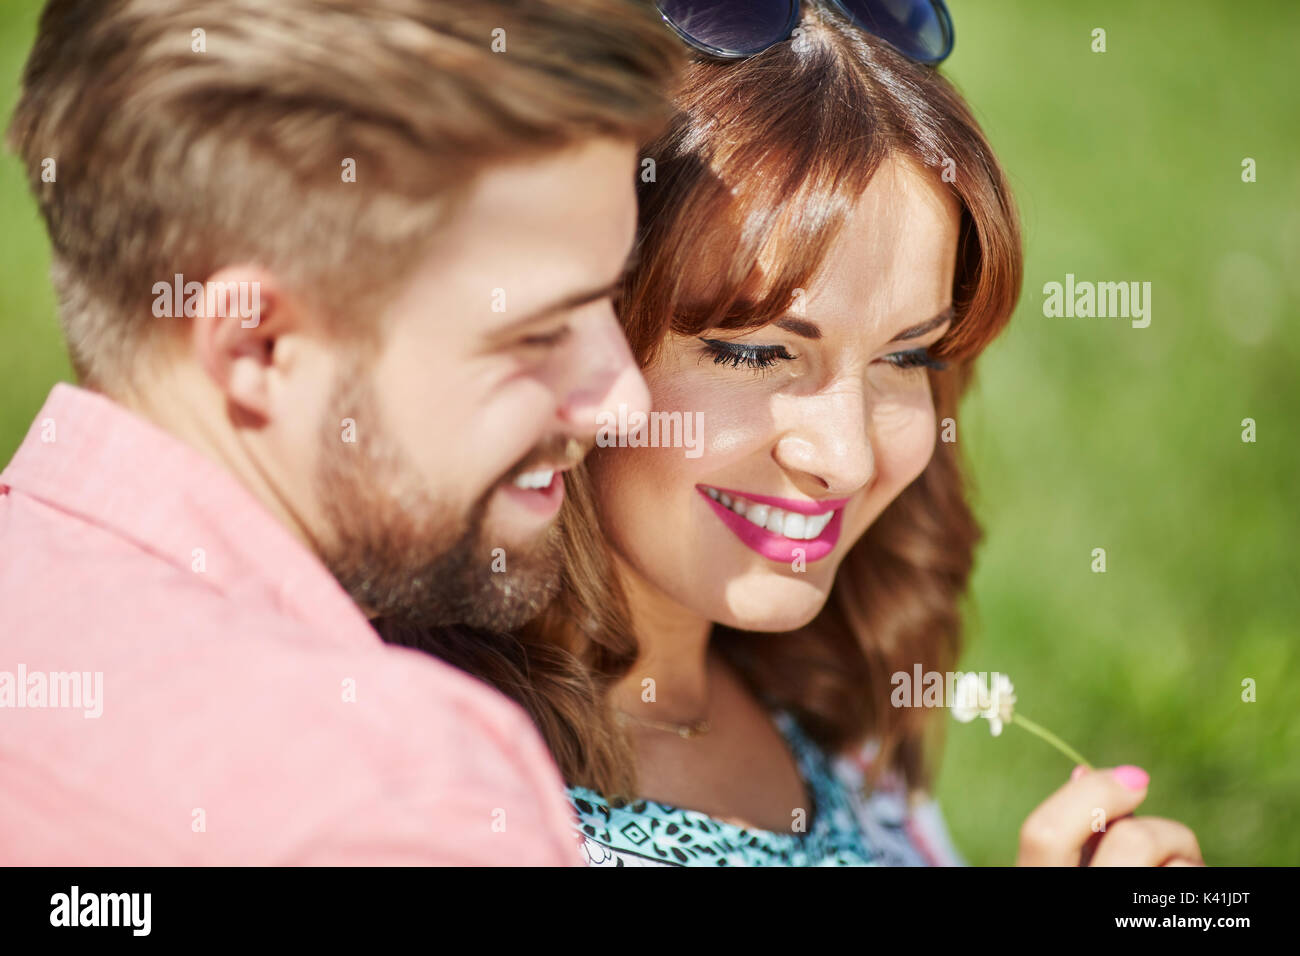 A photo of young, happy couple head over heels in love. The man is giving his girlfriend a flower. Stock Photo